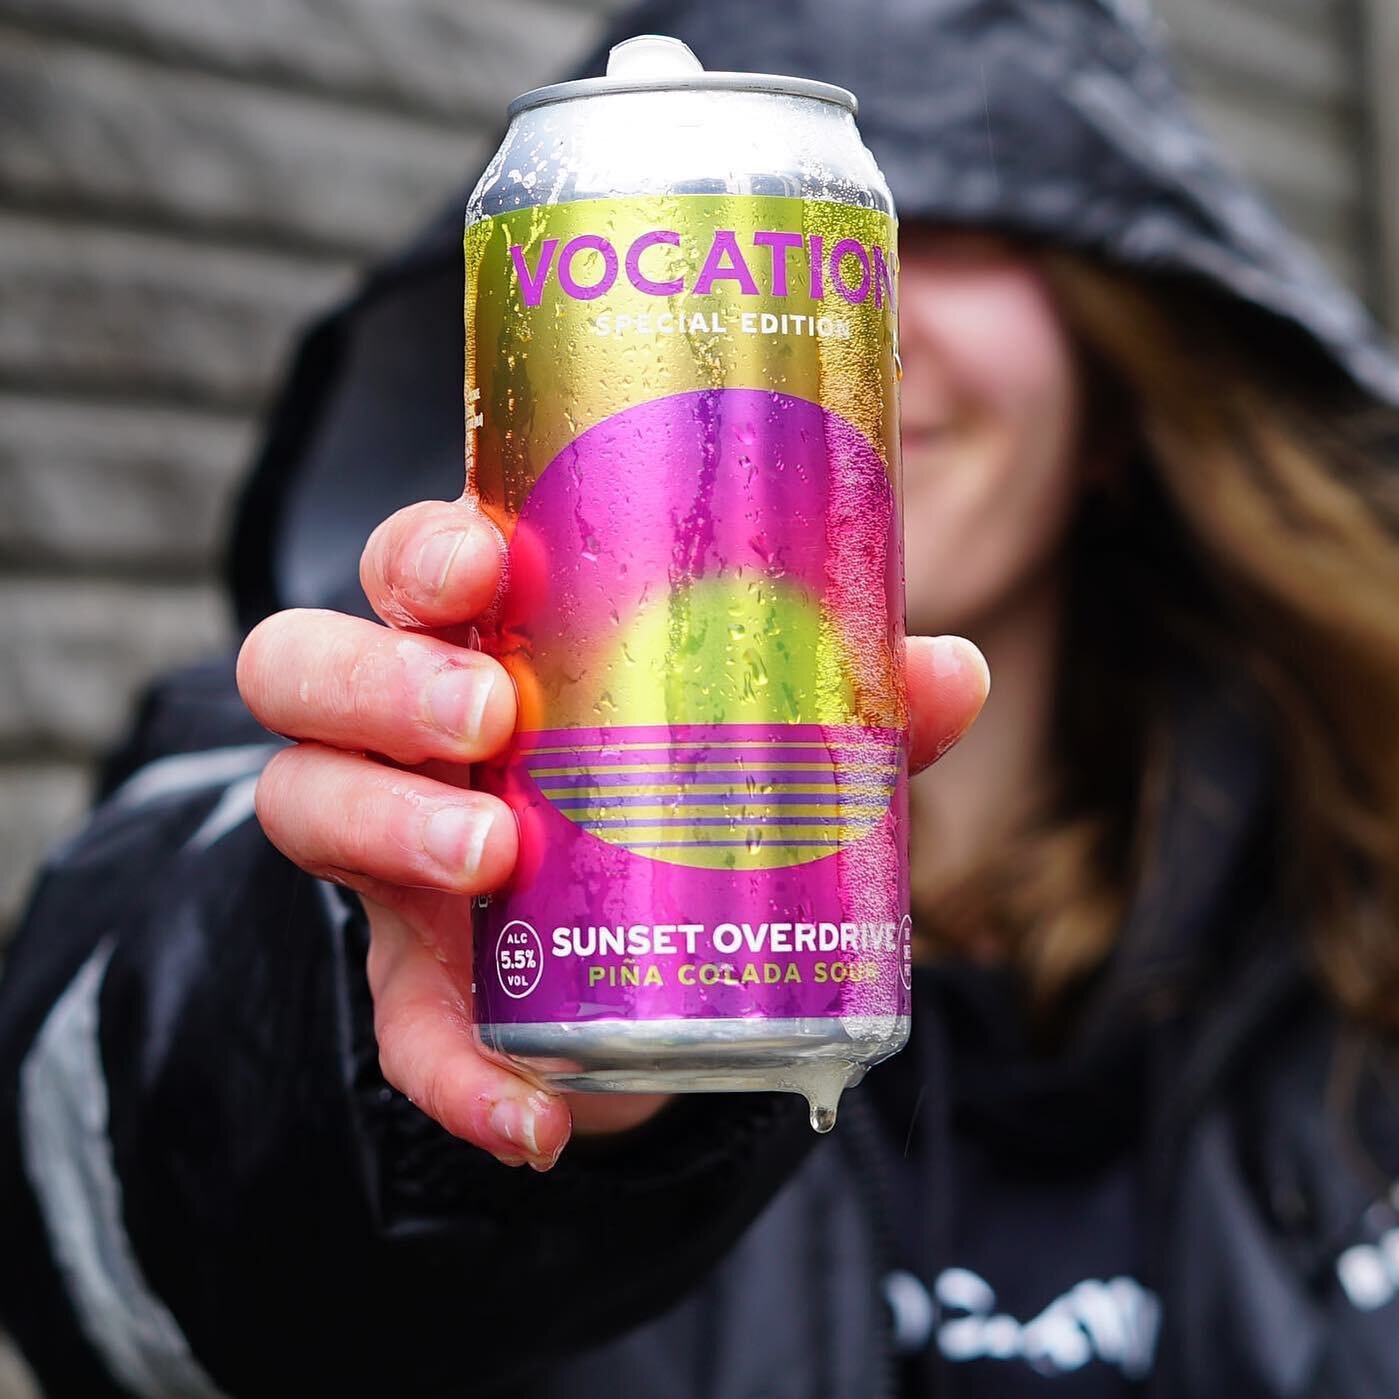 Whether you like Pi&ntilde;a  Coladas or just in need of a mental-vacay, this  pastry-coconut-pineapple-tangerine sour from @vocationbrewery is a winner. It gets to you &ndash; beach vibes and all! 

Hit us up for a hit of sunshine ☀️